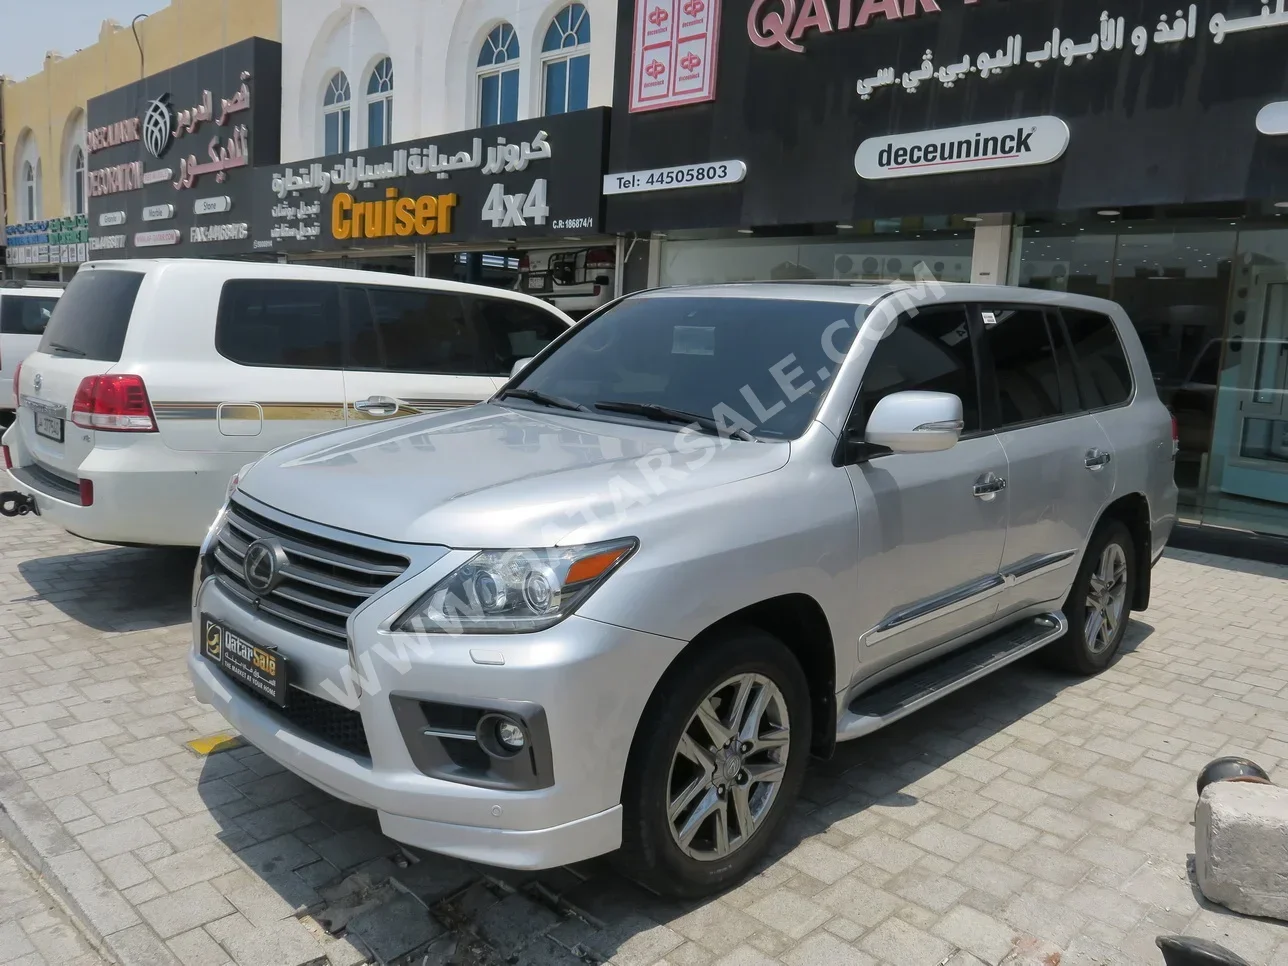 Lexus  LX  570 S  2015  Automatic  240,000 Km  8 Cylinder  Four Wheel Drive (4WD)  SUV  Silver